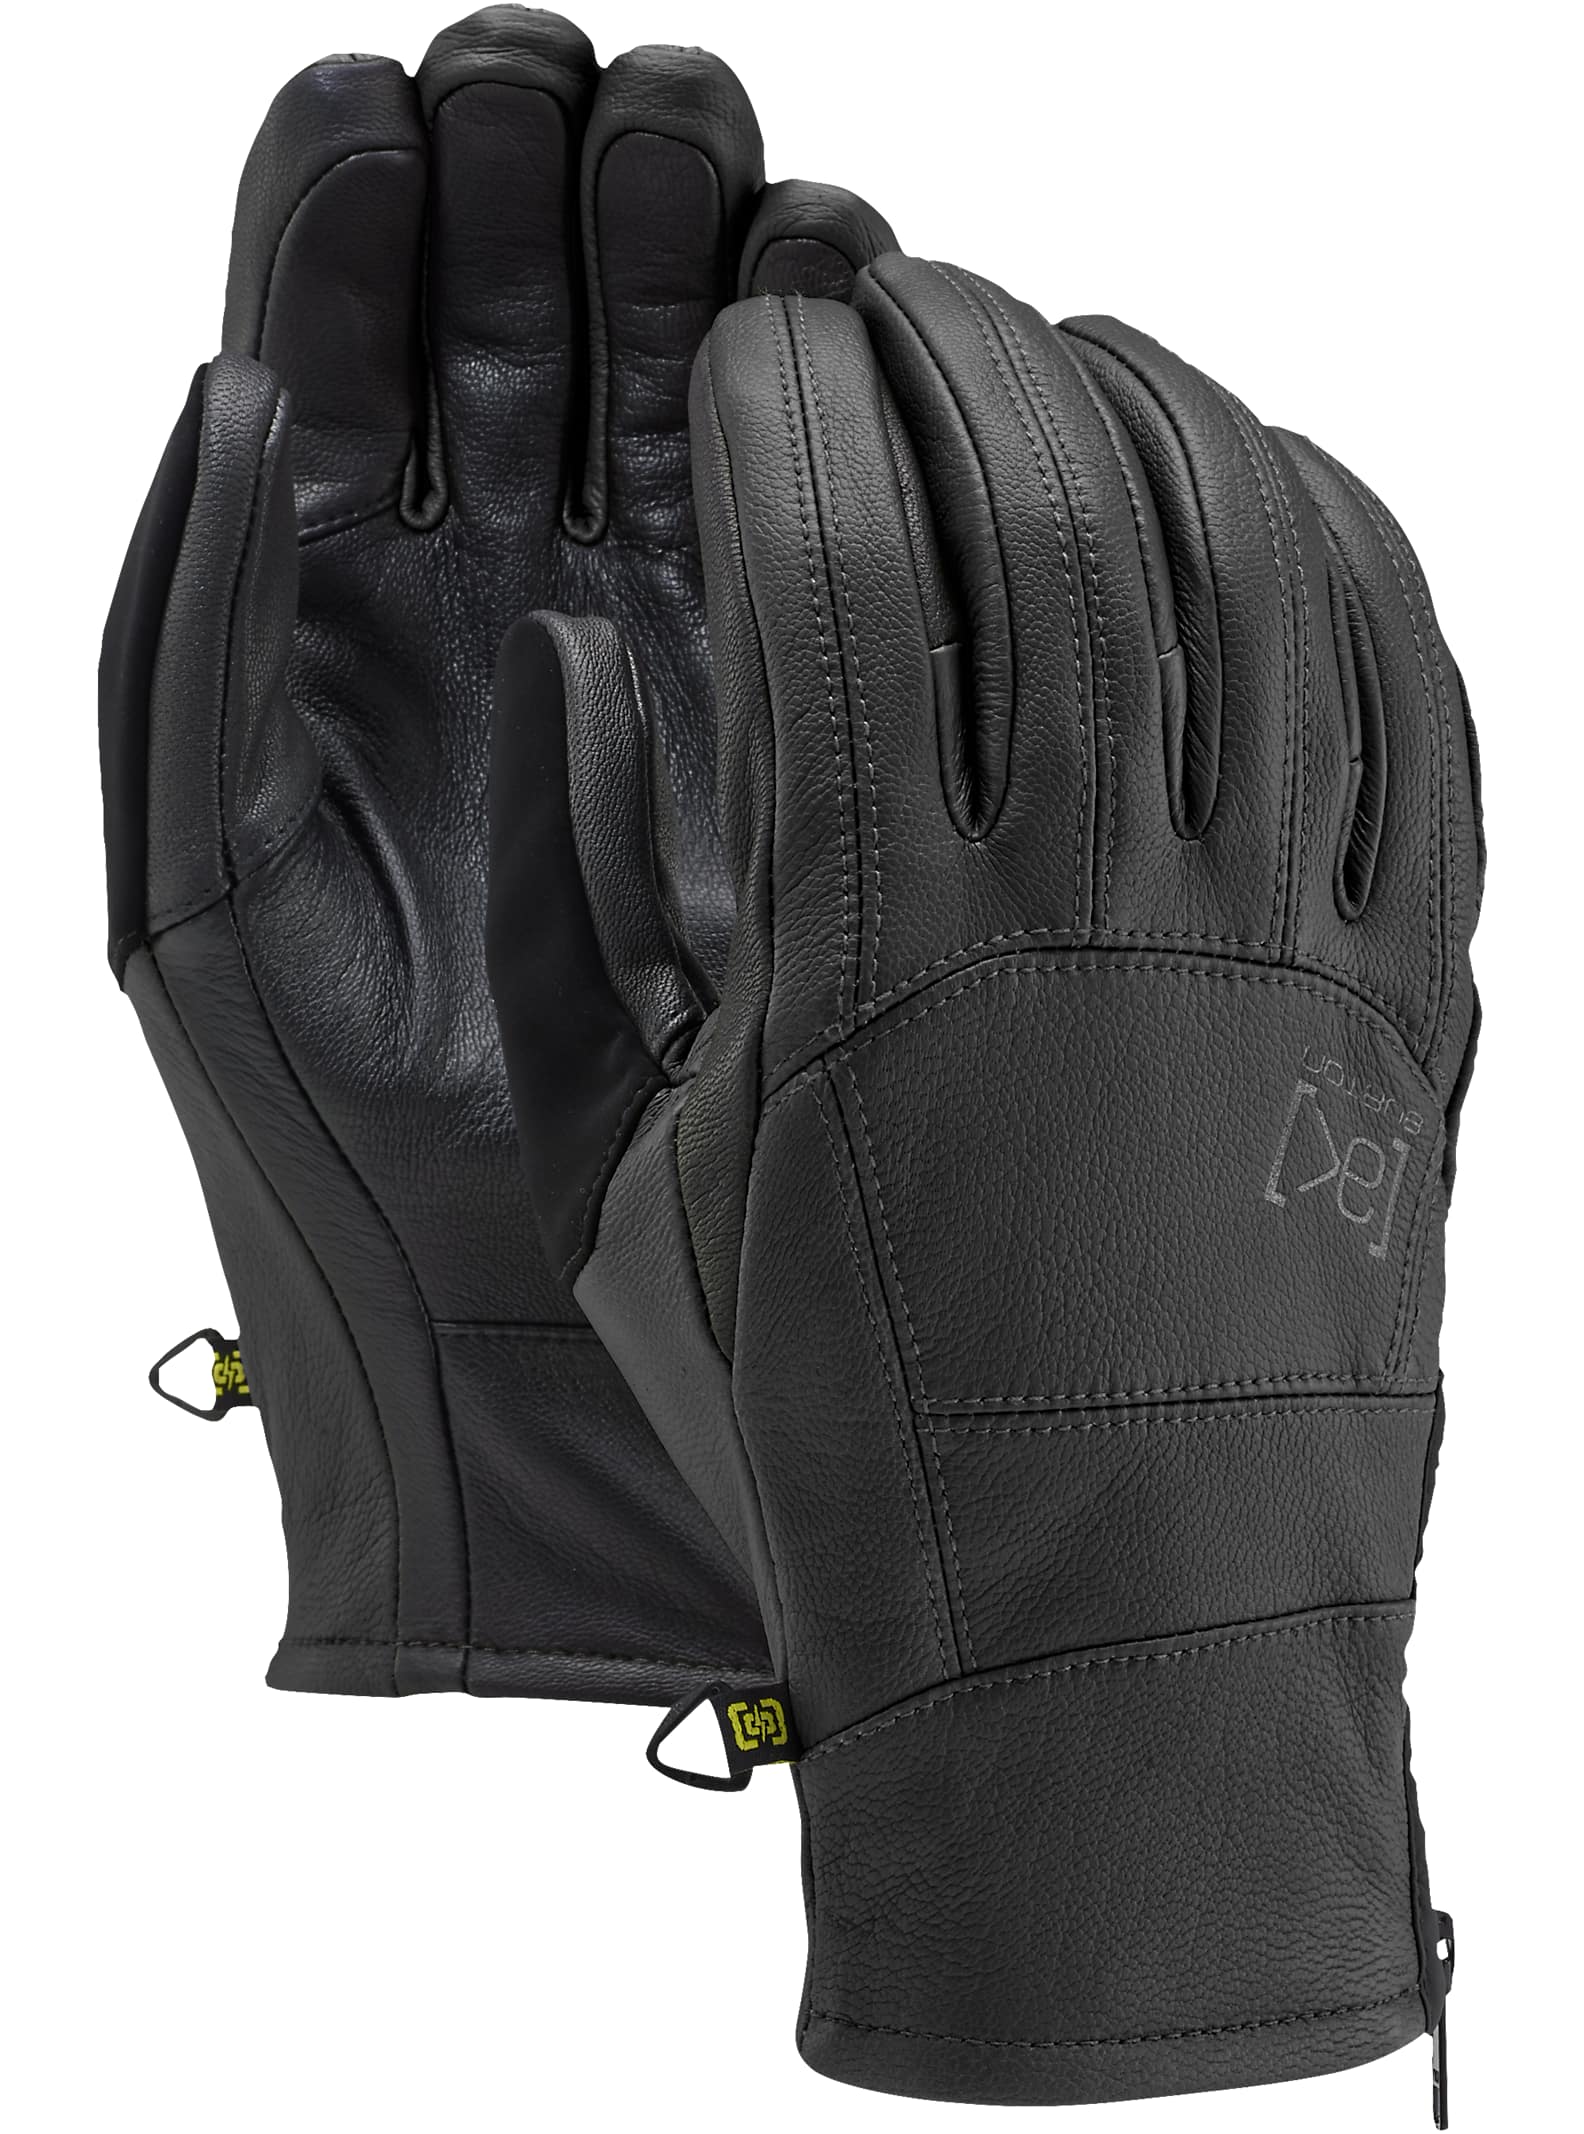 AK TOP QUALITY REAL SOFT LEATHER MENS FASHION DRIVING GLOVES BLACK